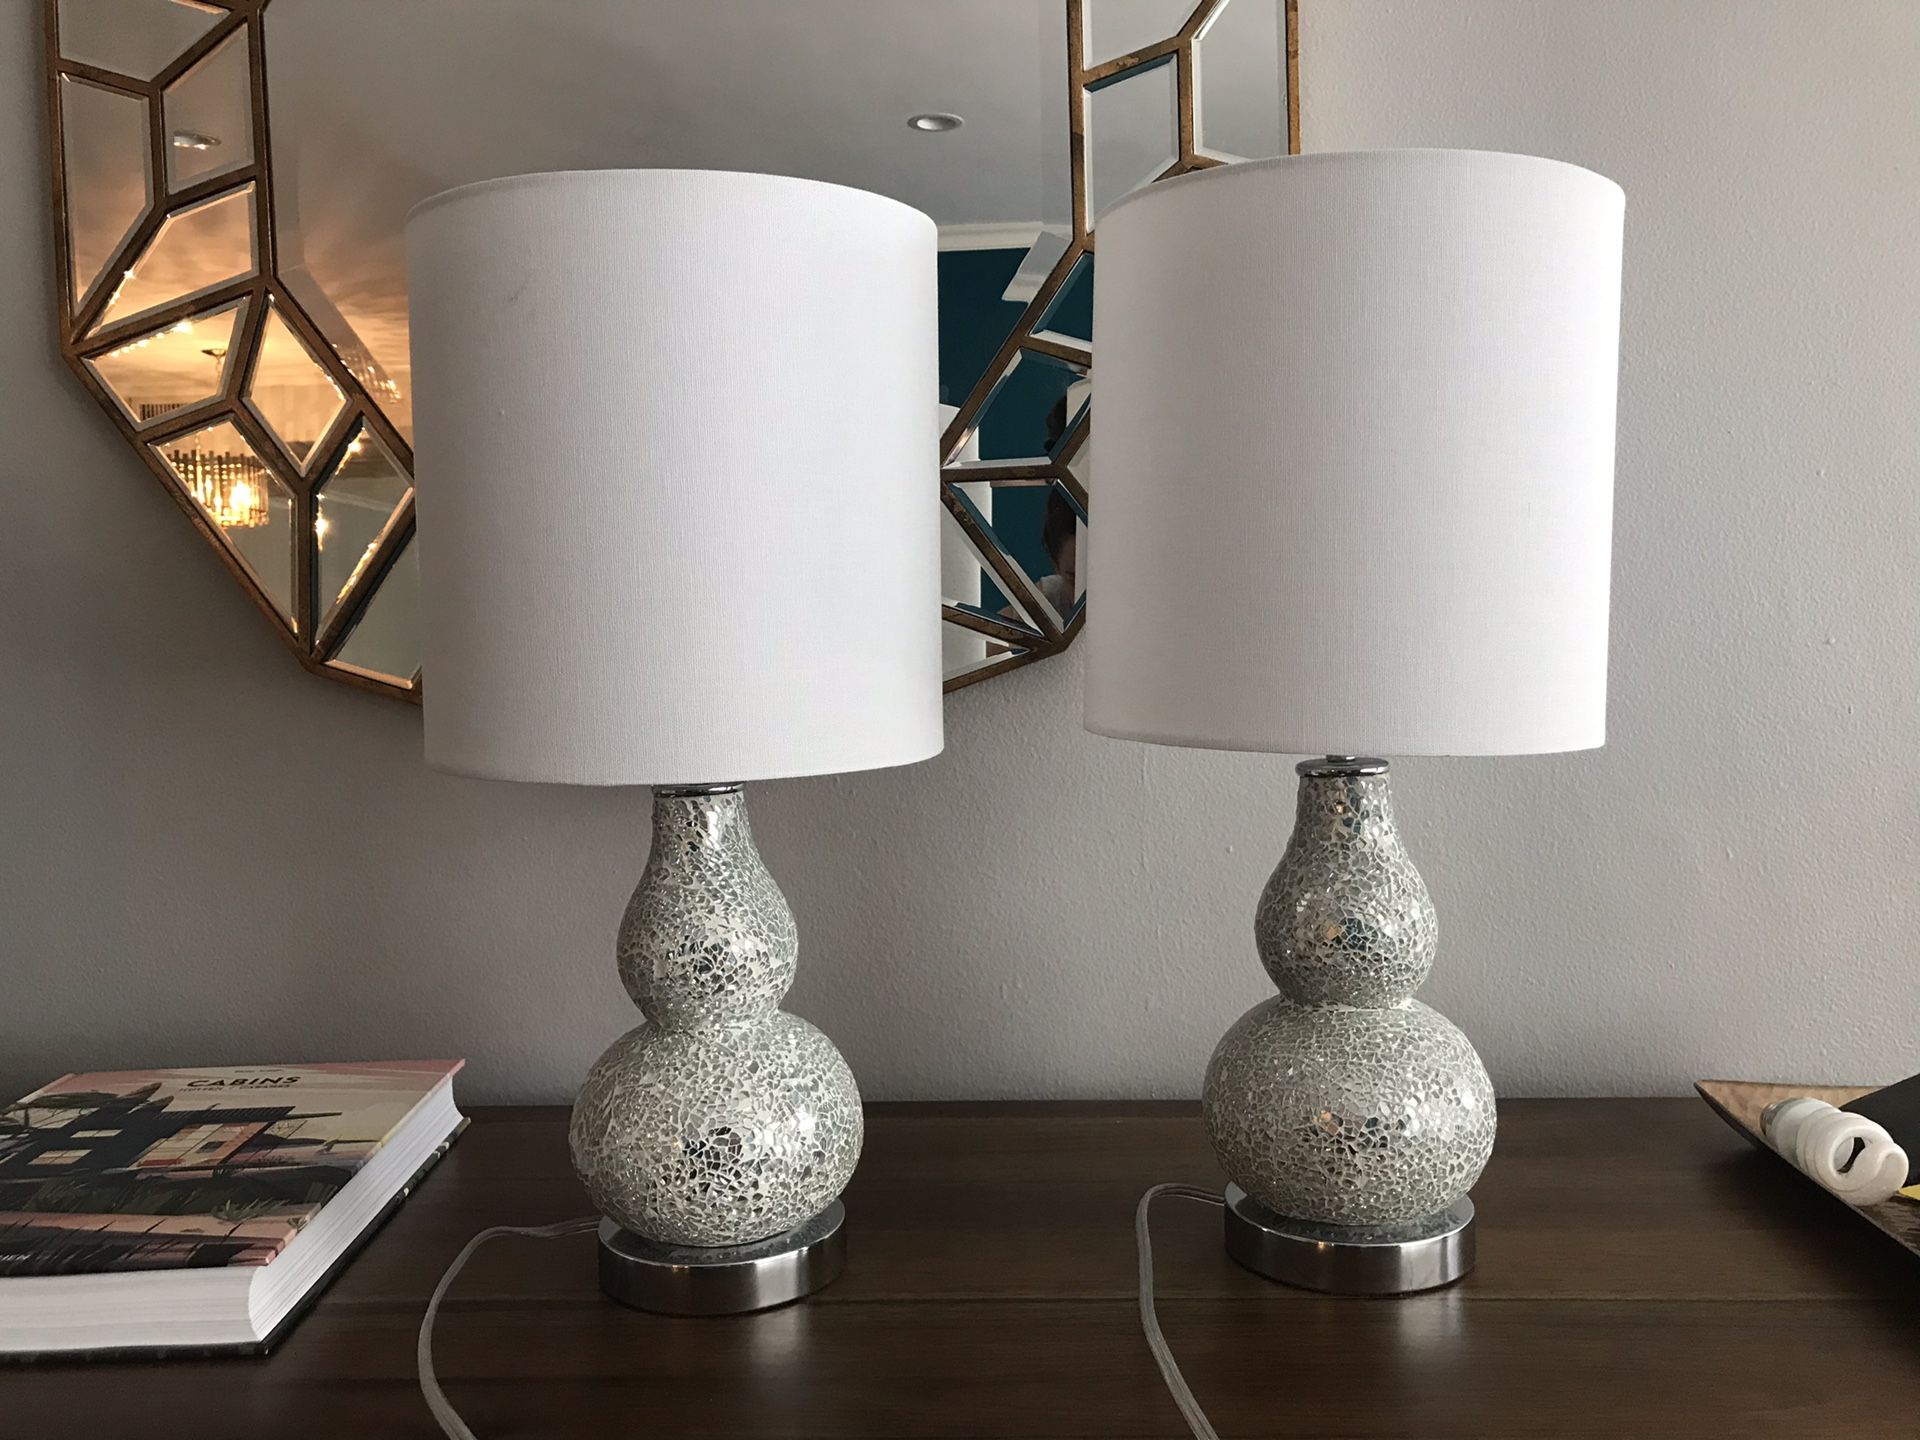 Two matching table lamps - light blue and chrome